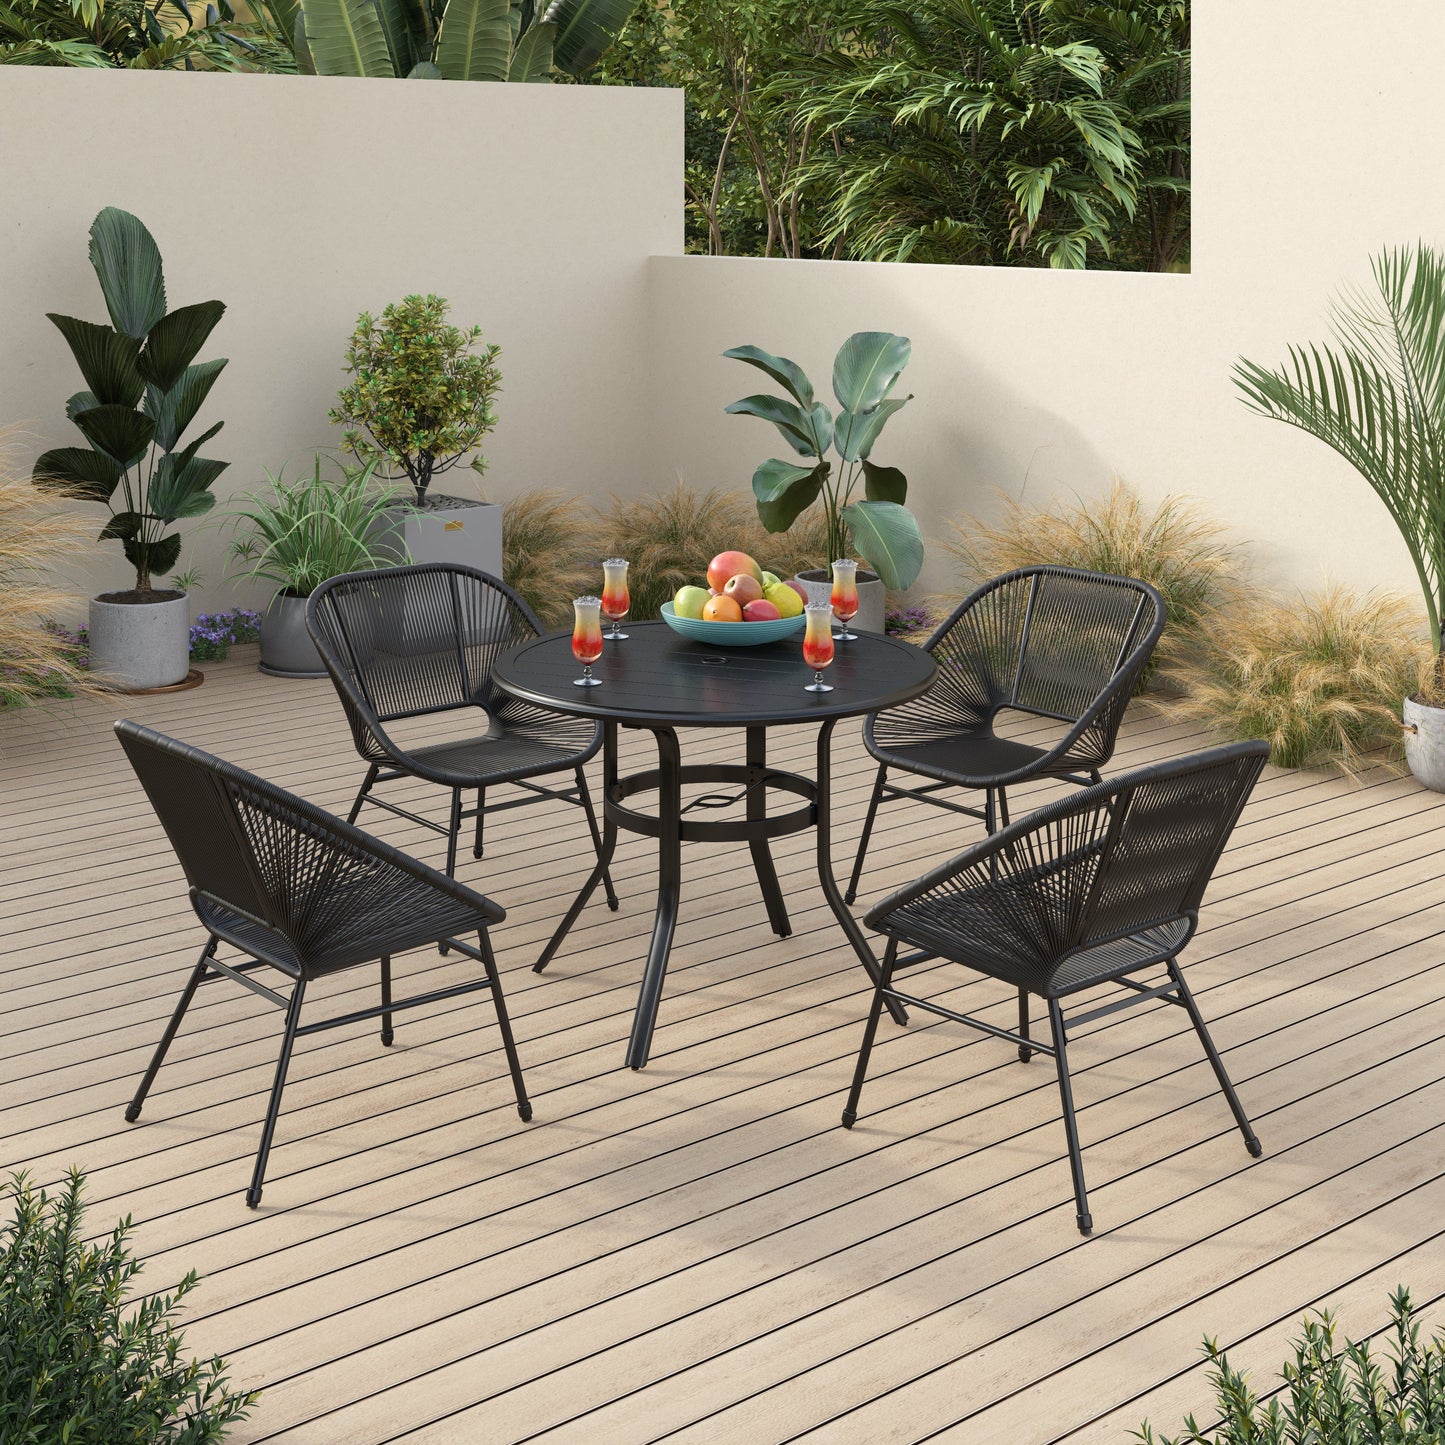 Sophia & William 5 Piece Patio Metal Dining Set Round Table and 4 Rattan Chairs